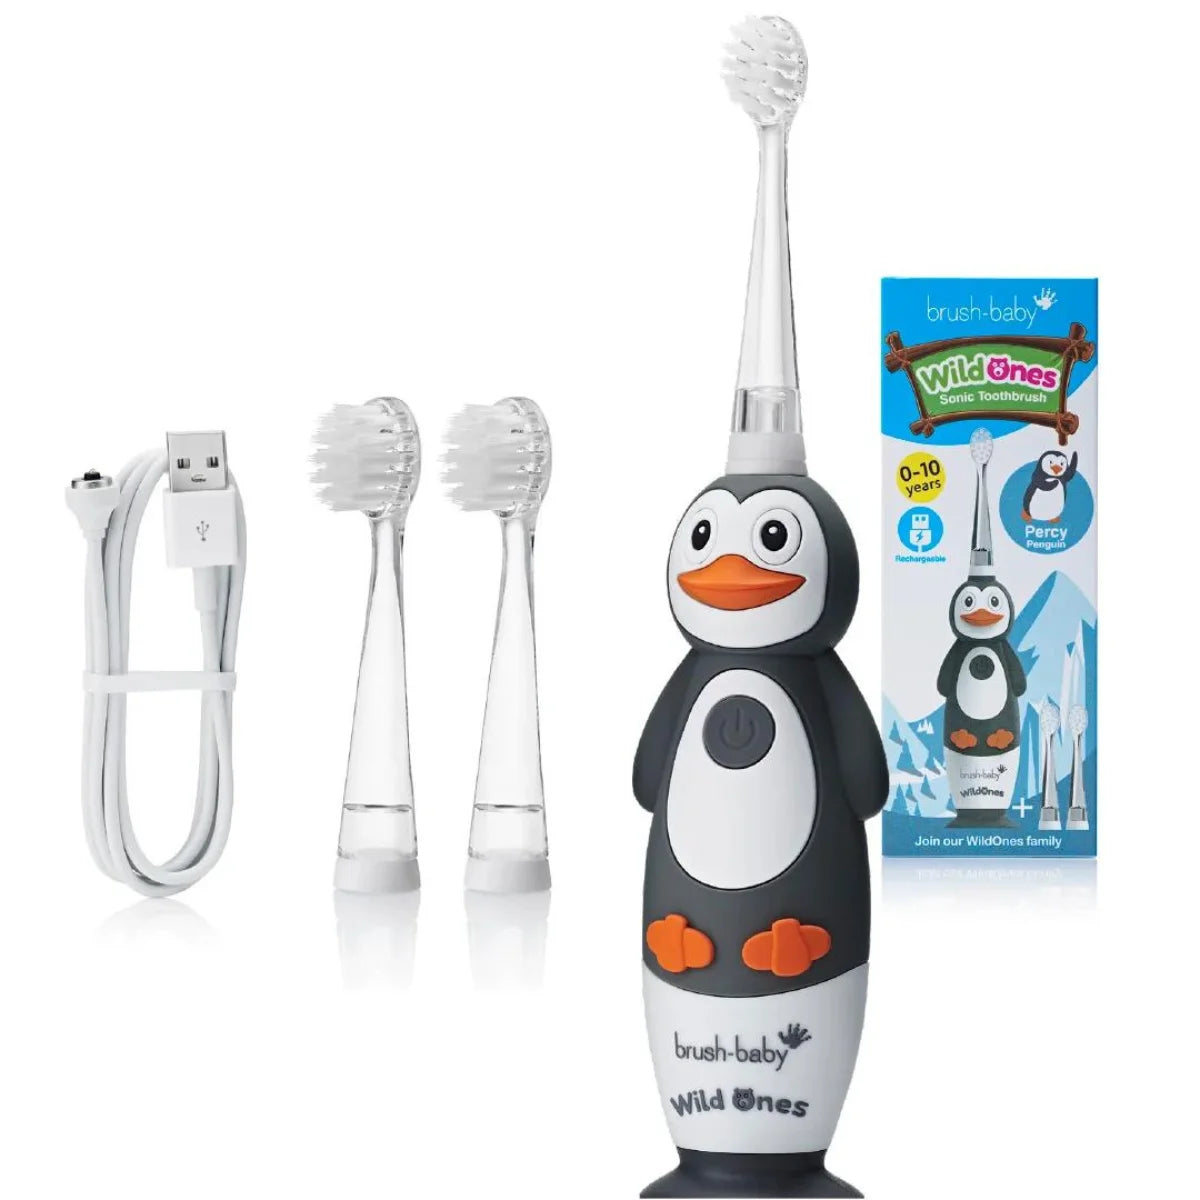 WildOnes Tribe grey and white percy penguin child electric rechargeable toothbrush with box packaging, replacement kids toothbrush heads and usb charging cable